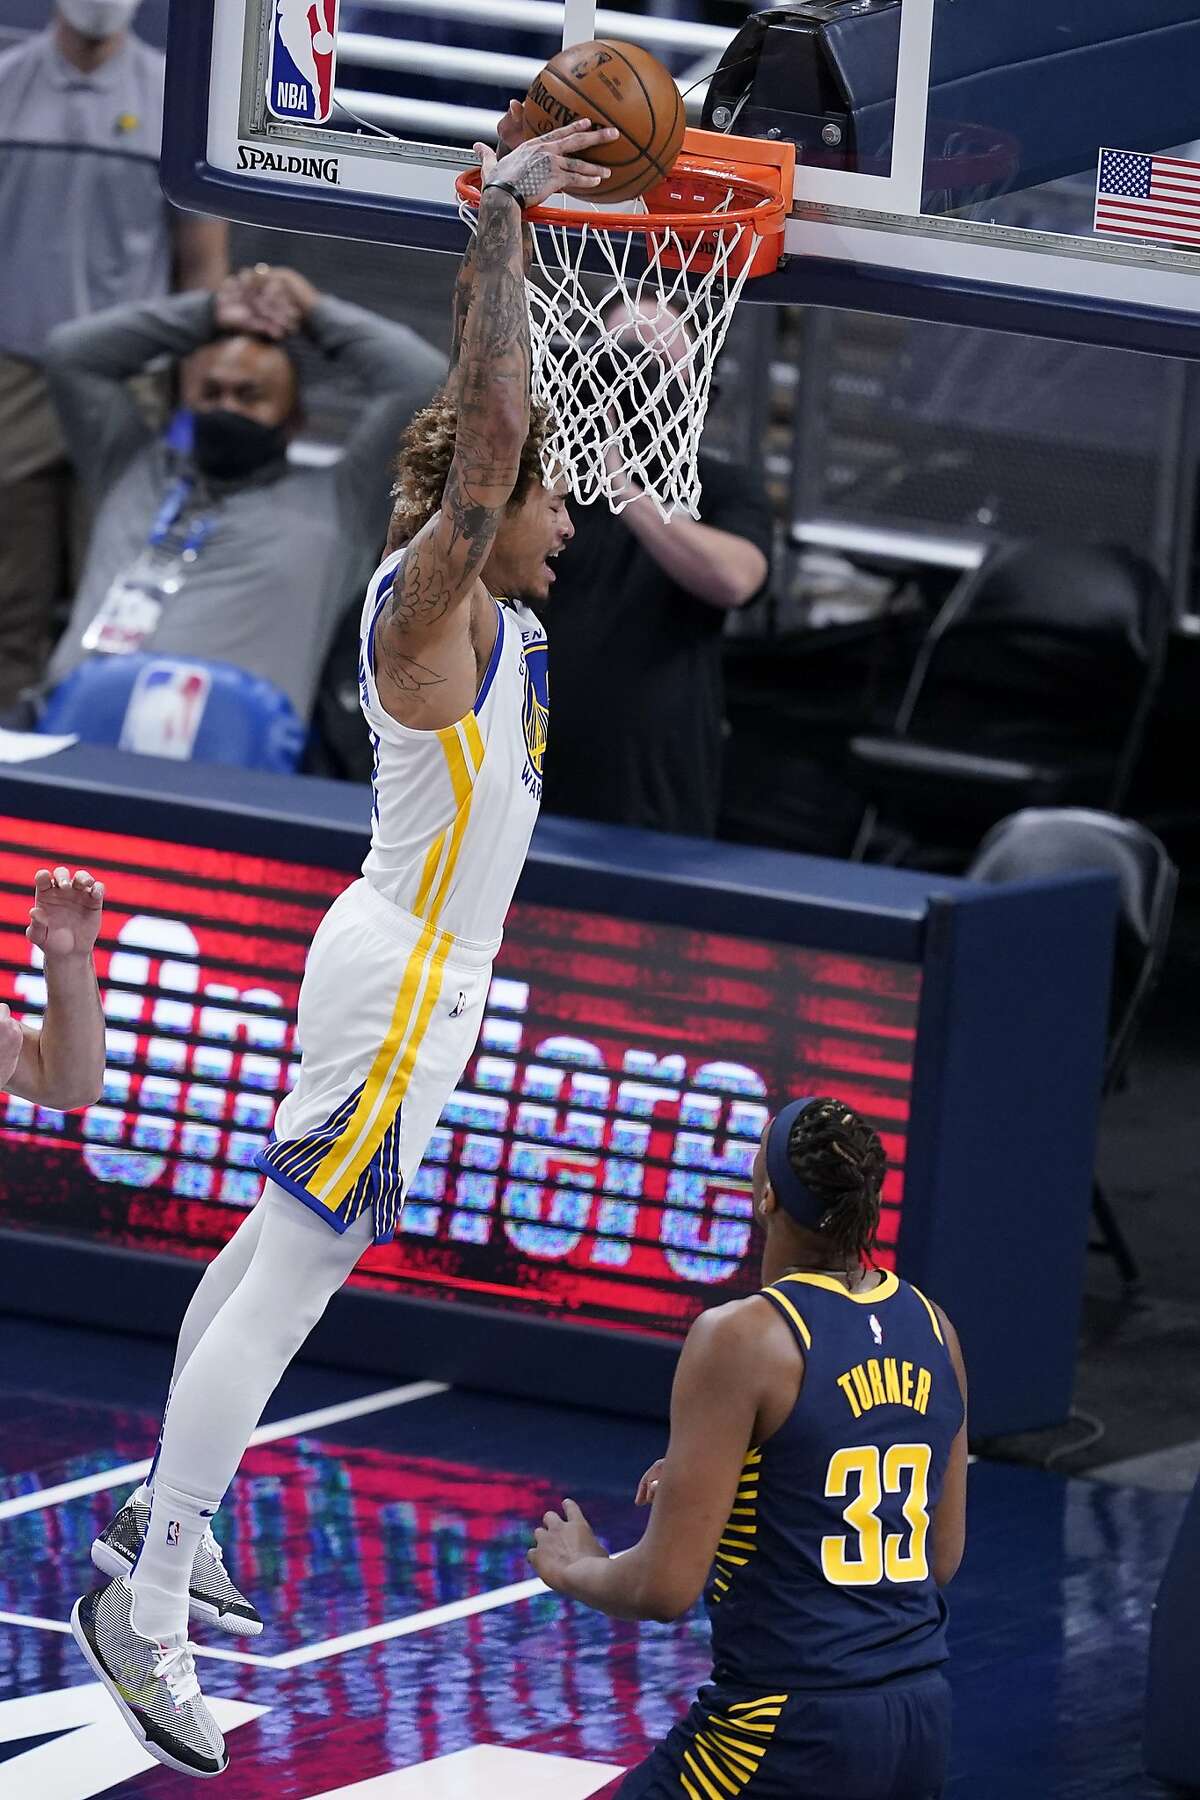 Warriors guard Kelly Oubre Jr. dunks for two of his 17 points as Indiana’s Myles Turner watches. Oubre was a plus-10 on the night, tied with Kent Bazemore for the team lead.